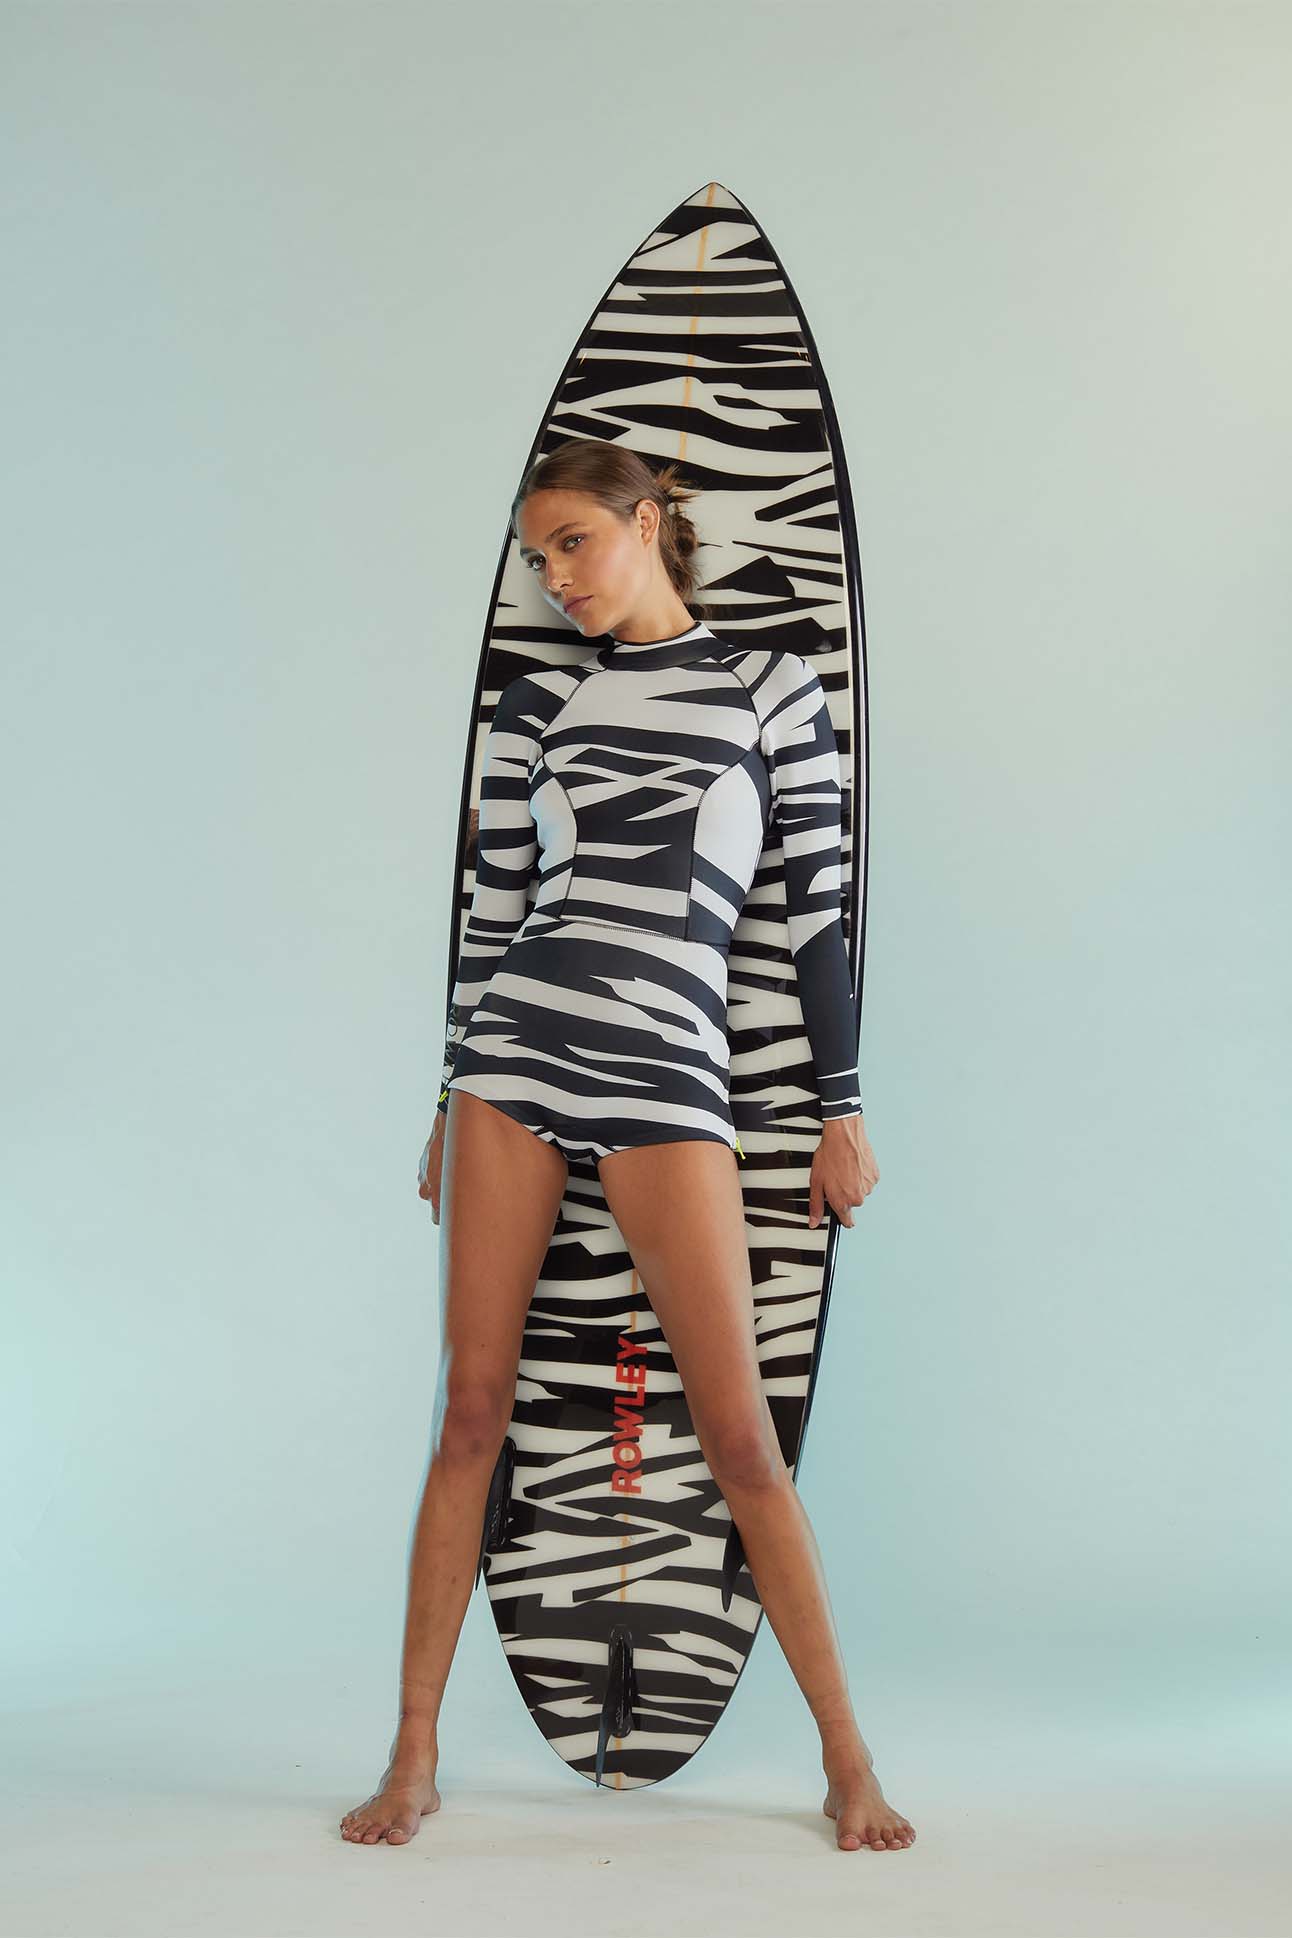 a person in a zebra print swimsuit leaning on a surfboard